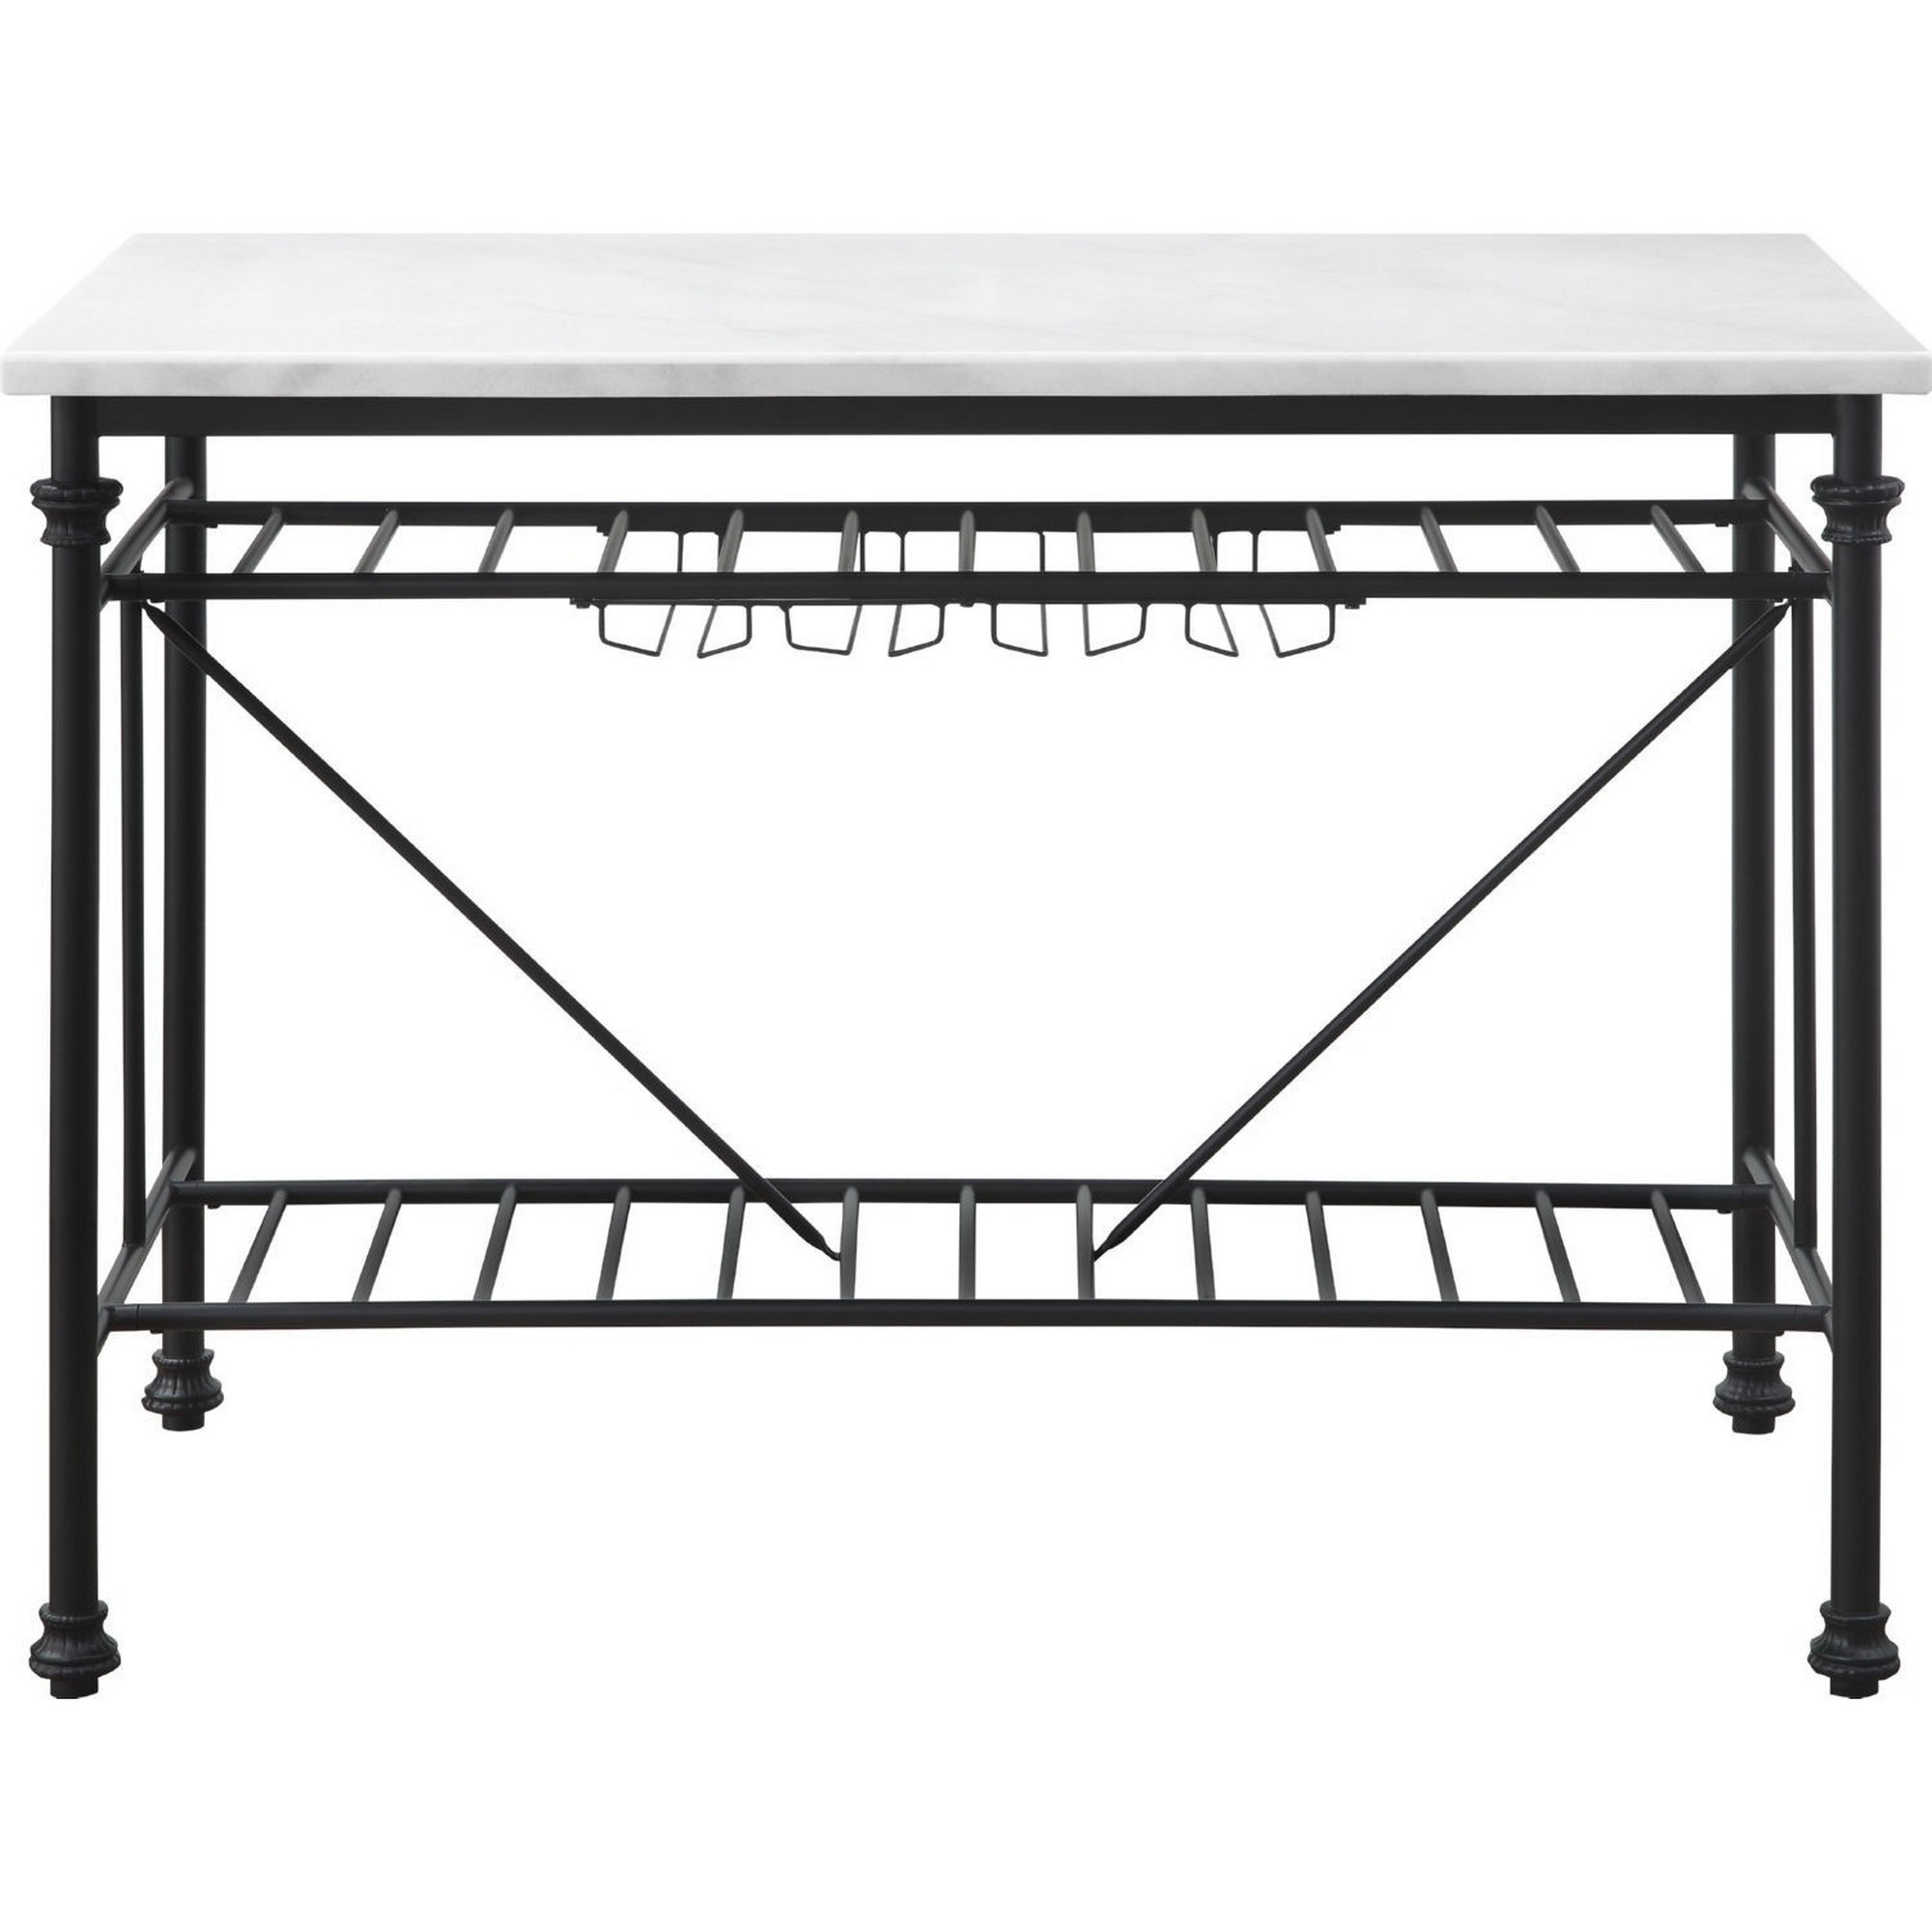 Benjara Kitchen Island with Marble Top and Slatted Shelf, Black and White